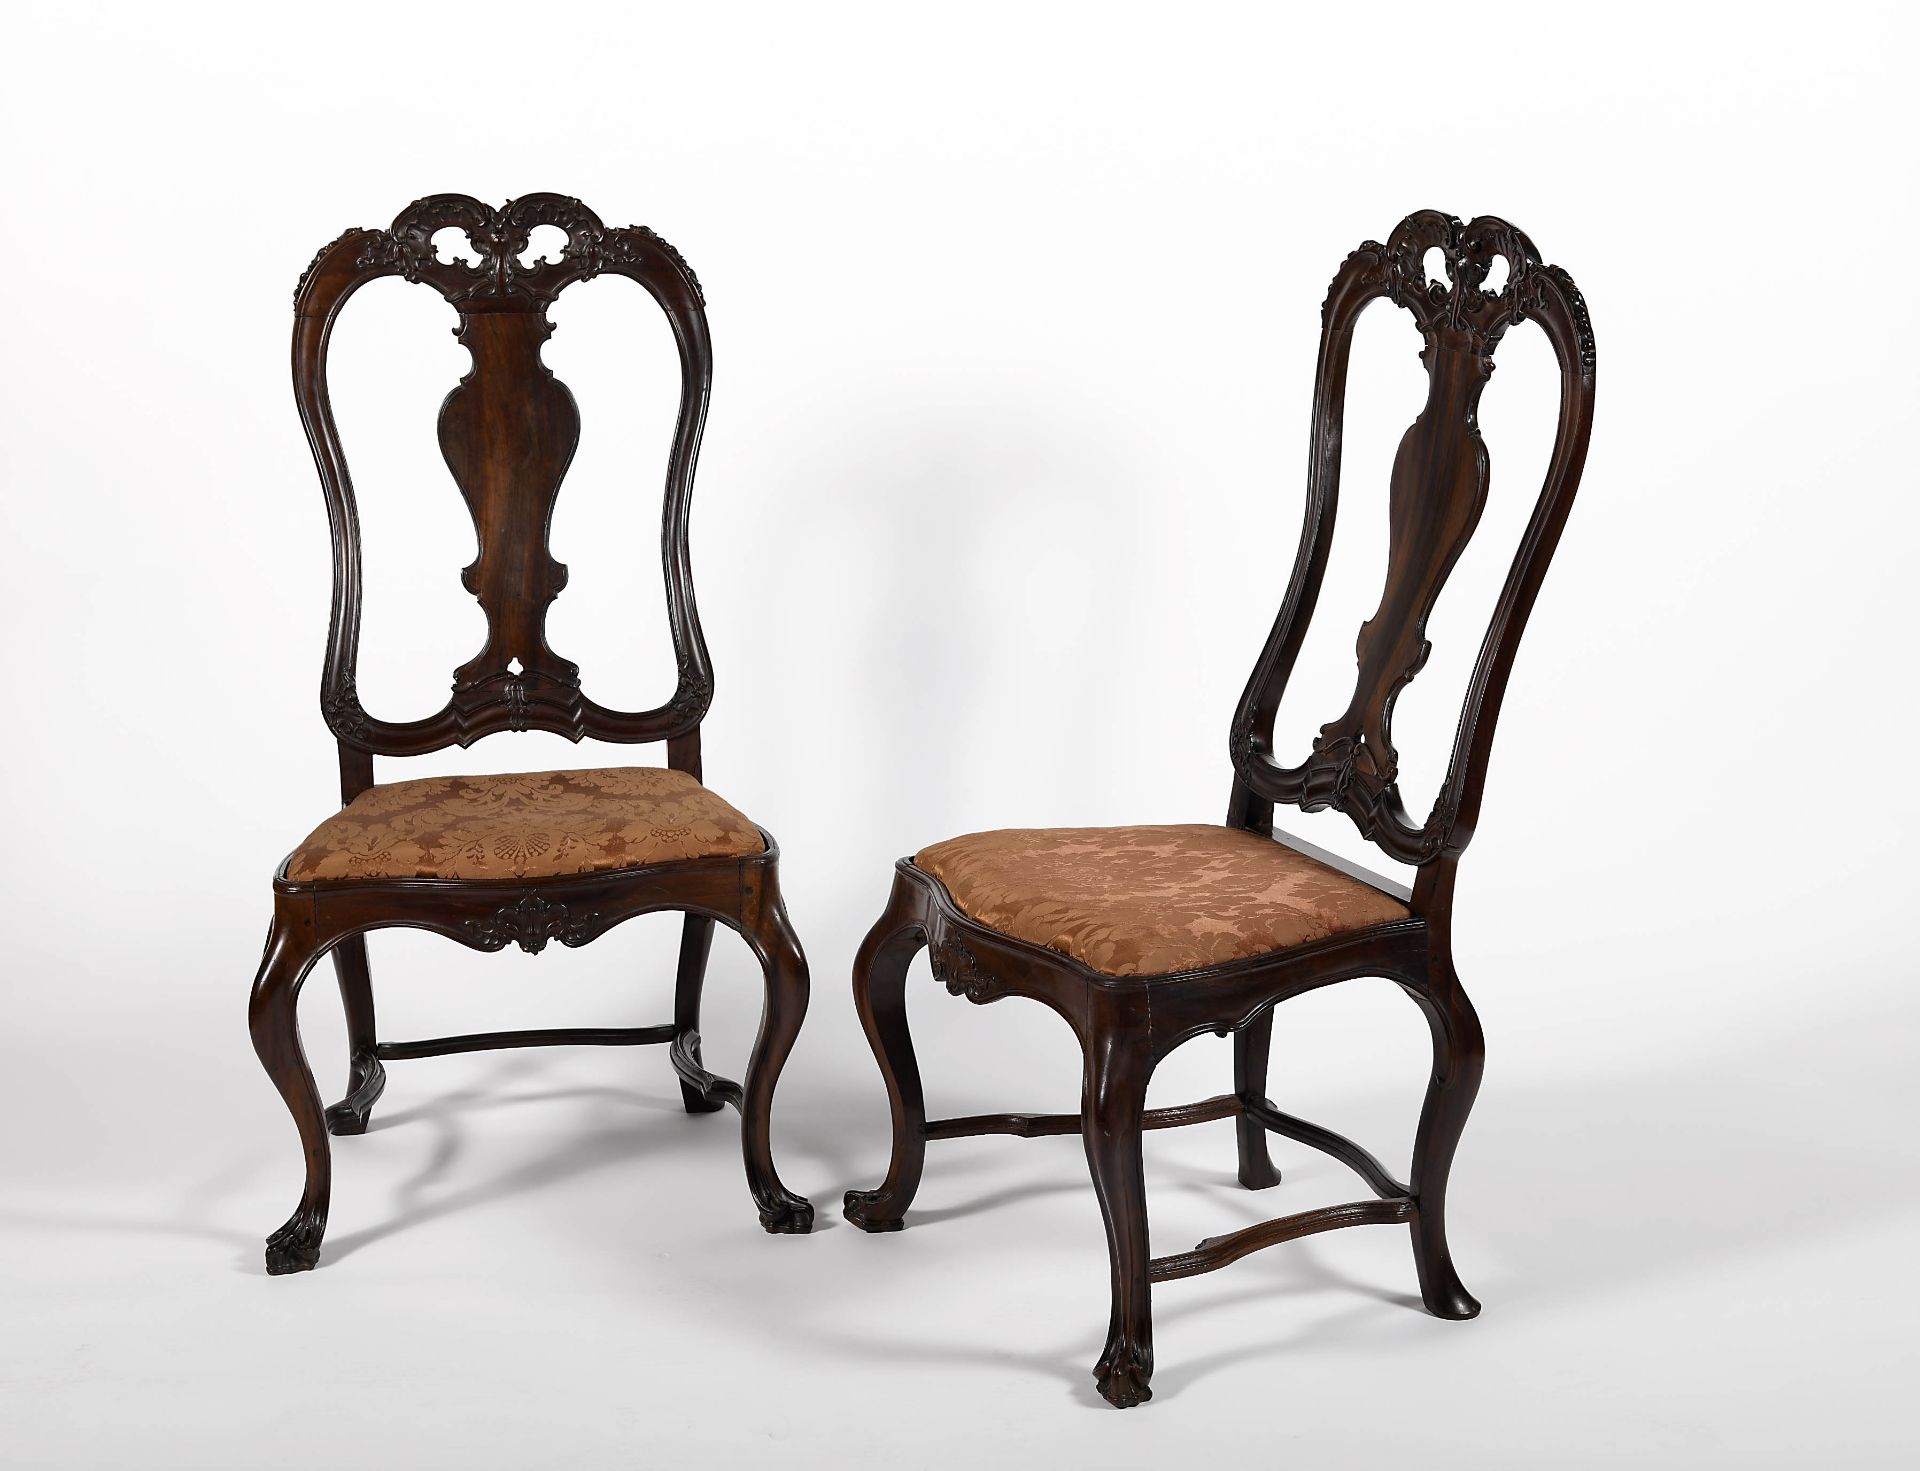 A pair of chairs